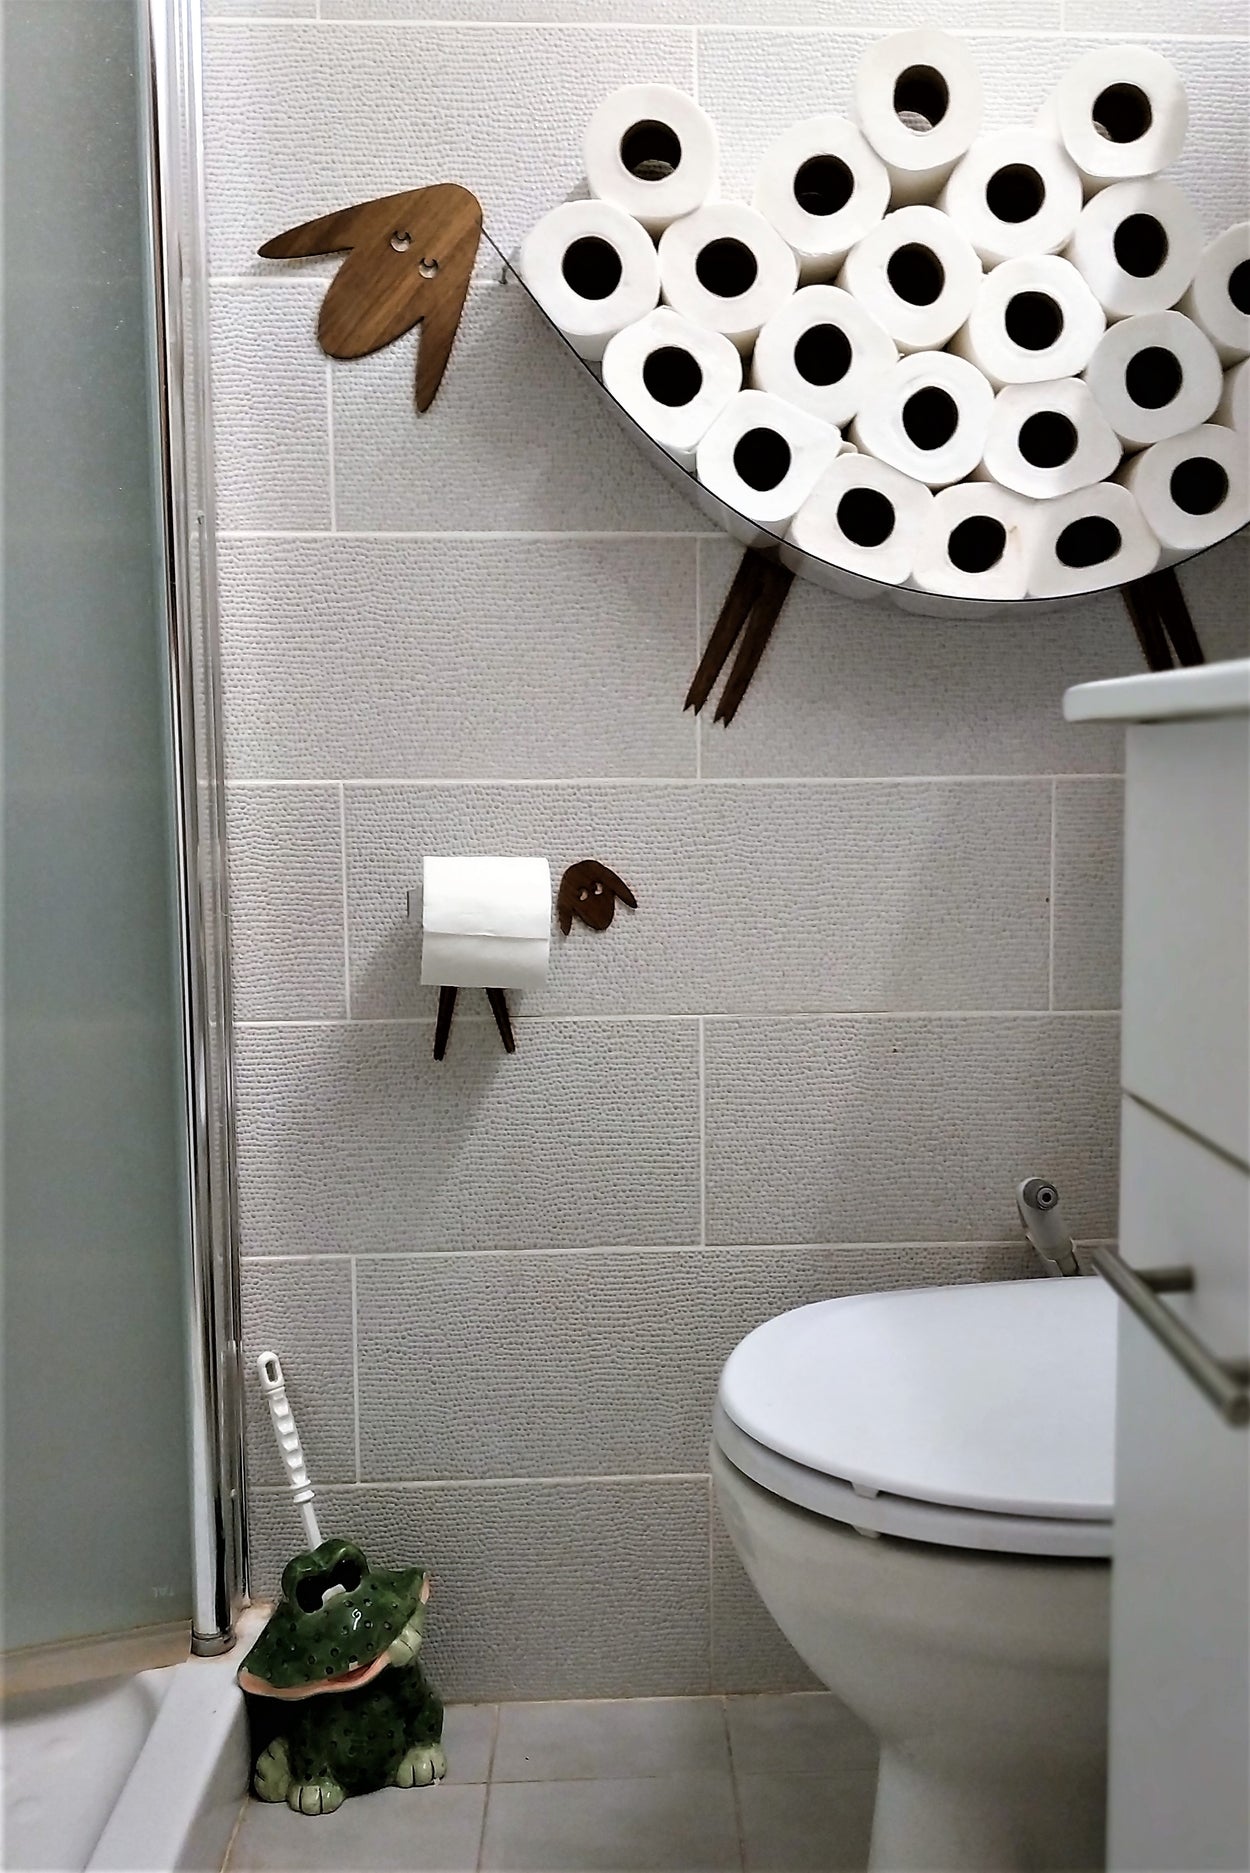 Shelf-Sheep for storing of toilet paper rolls with a roll holder-lamb